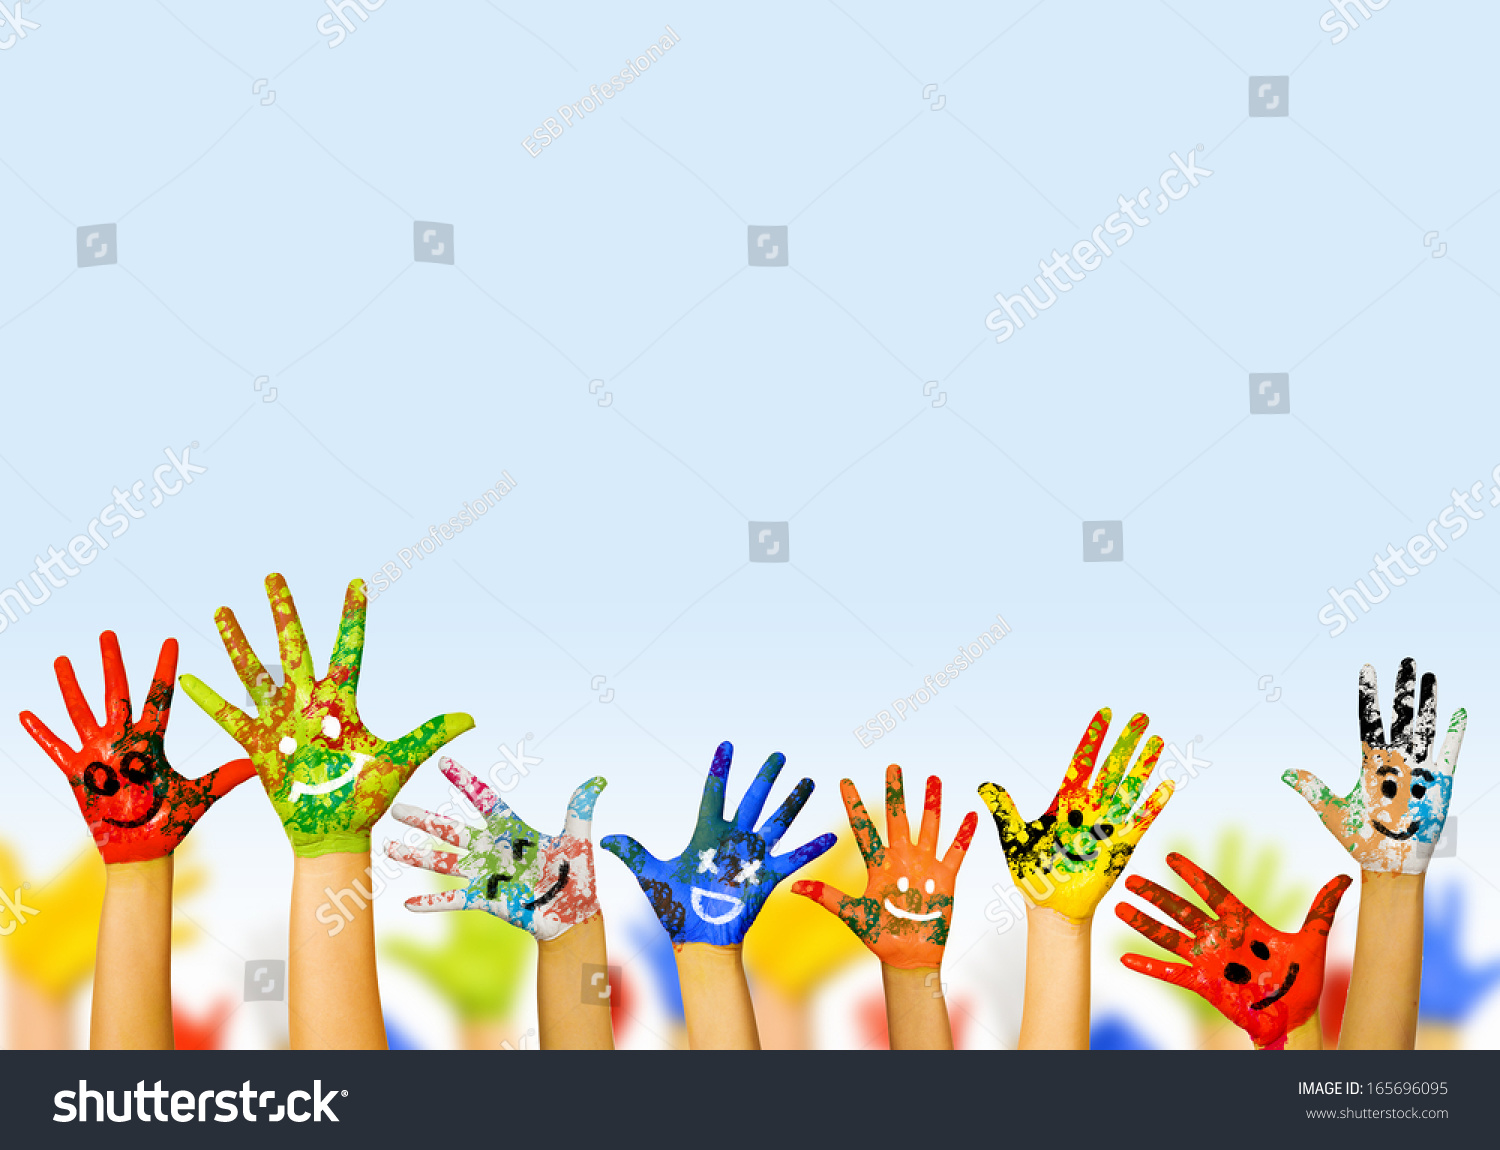 Image of human hands in colorful paint with smiles #165696095